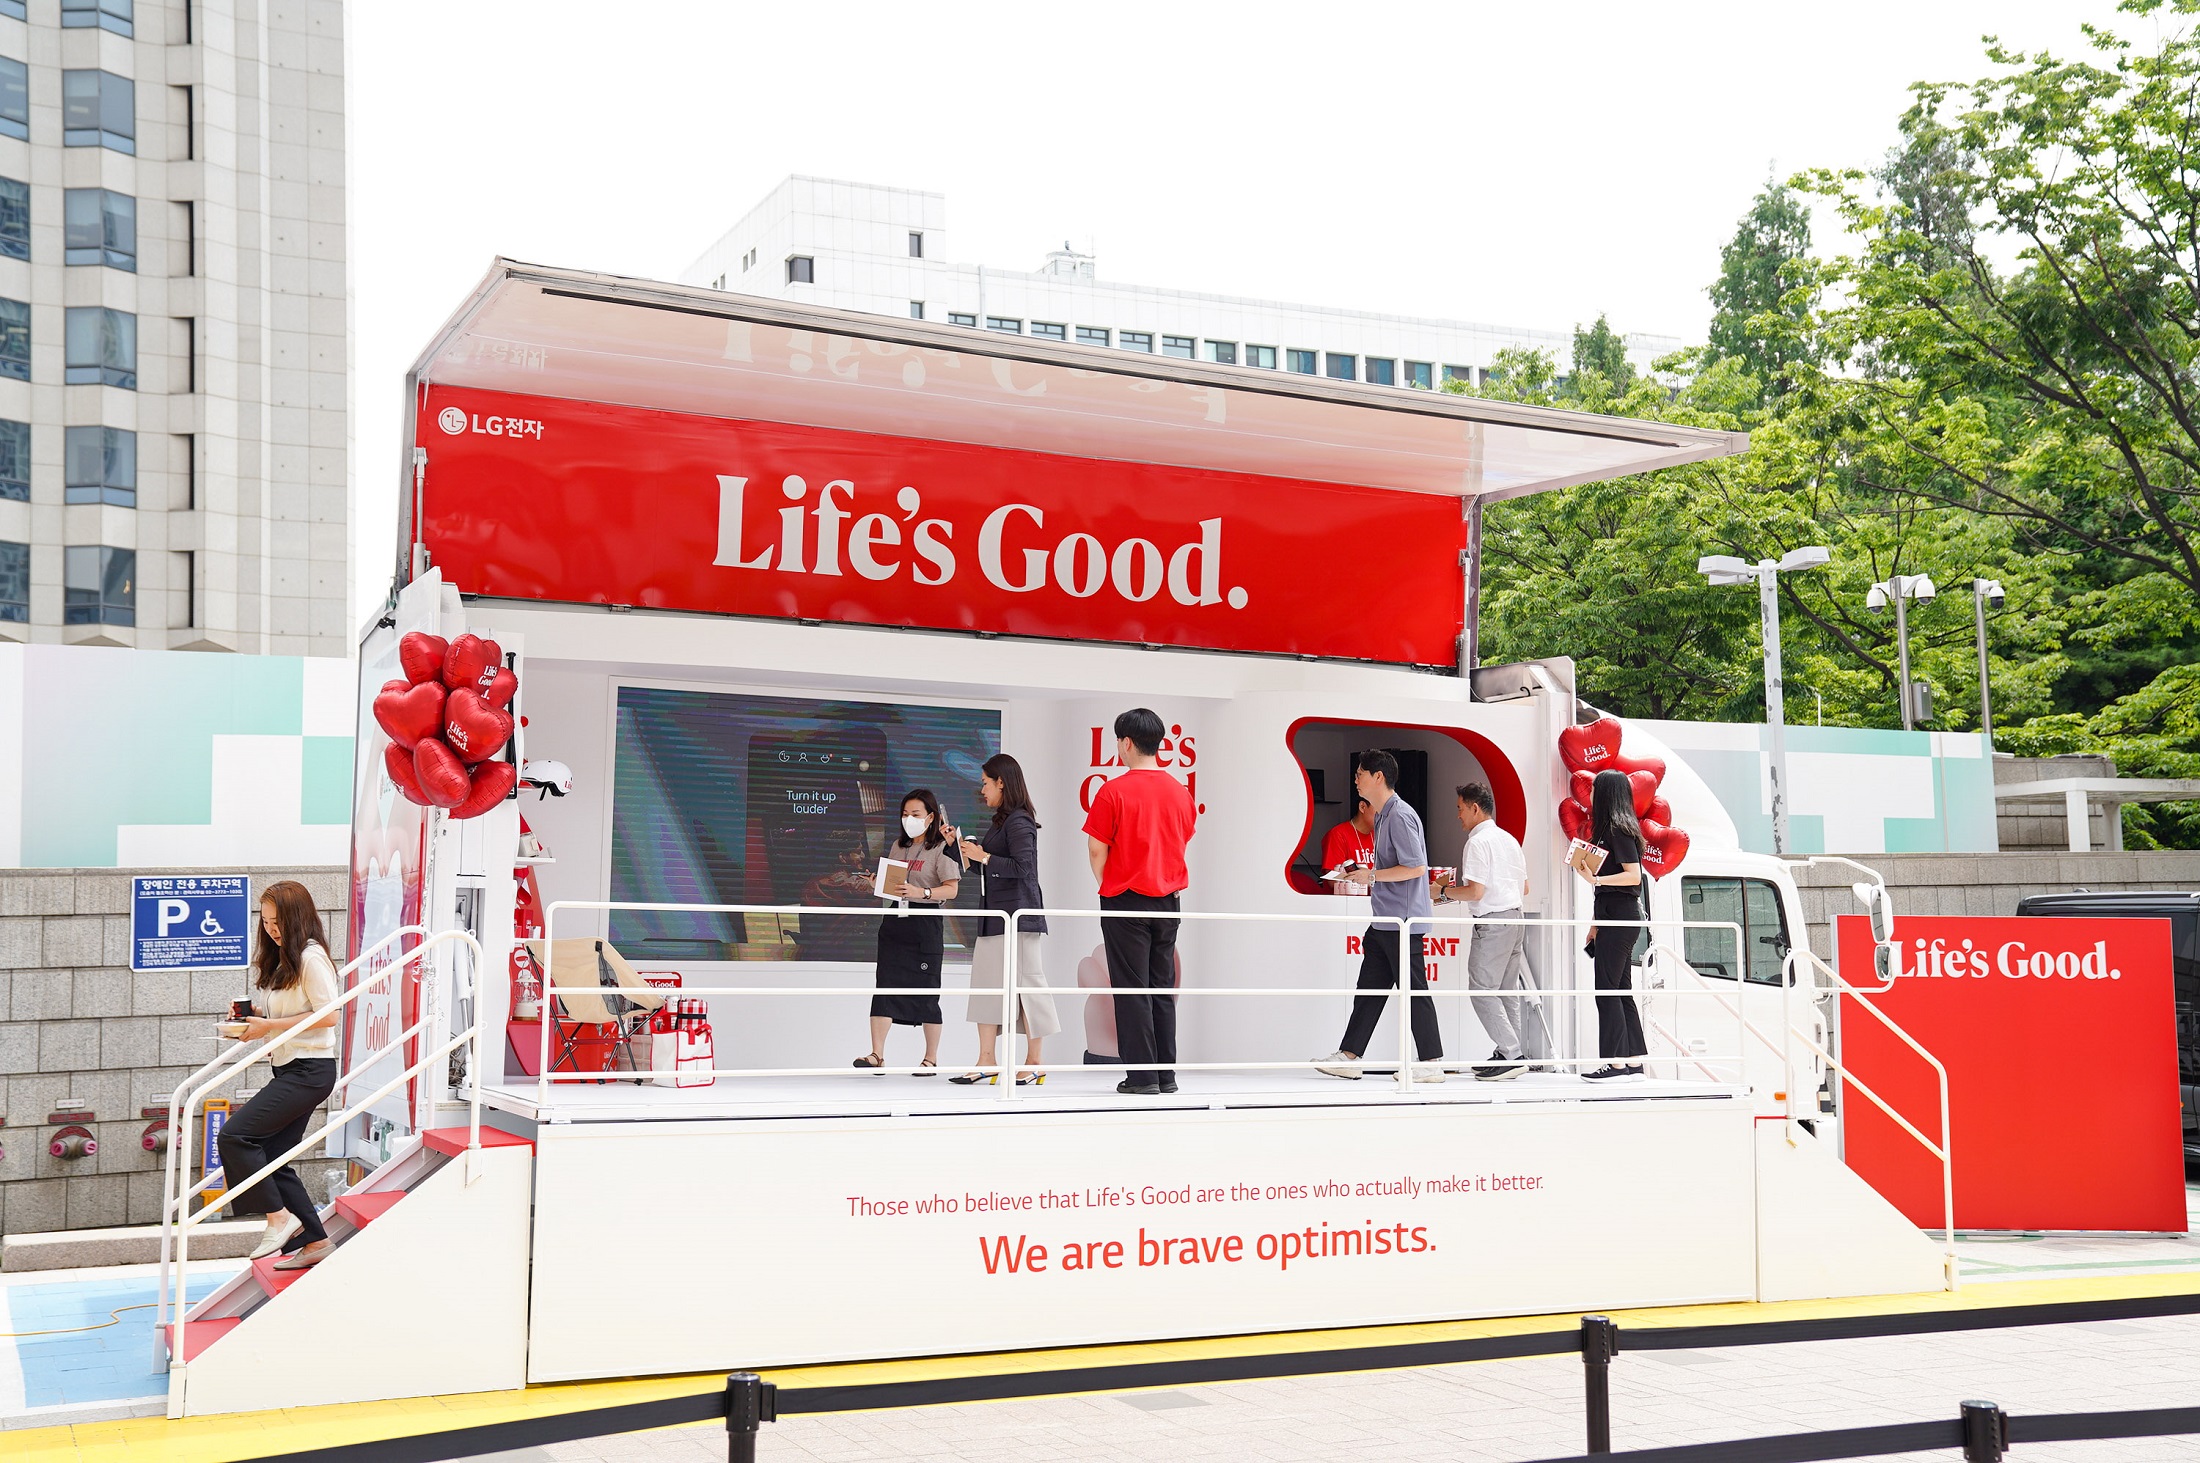 LG staff participating Life's Good event, receiving gifts prepared for the occasion